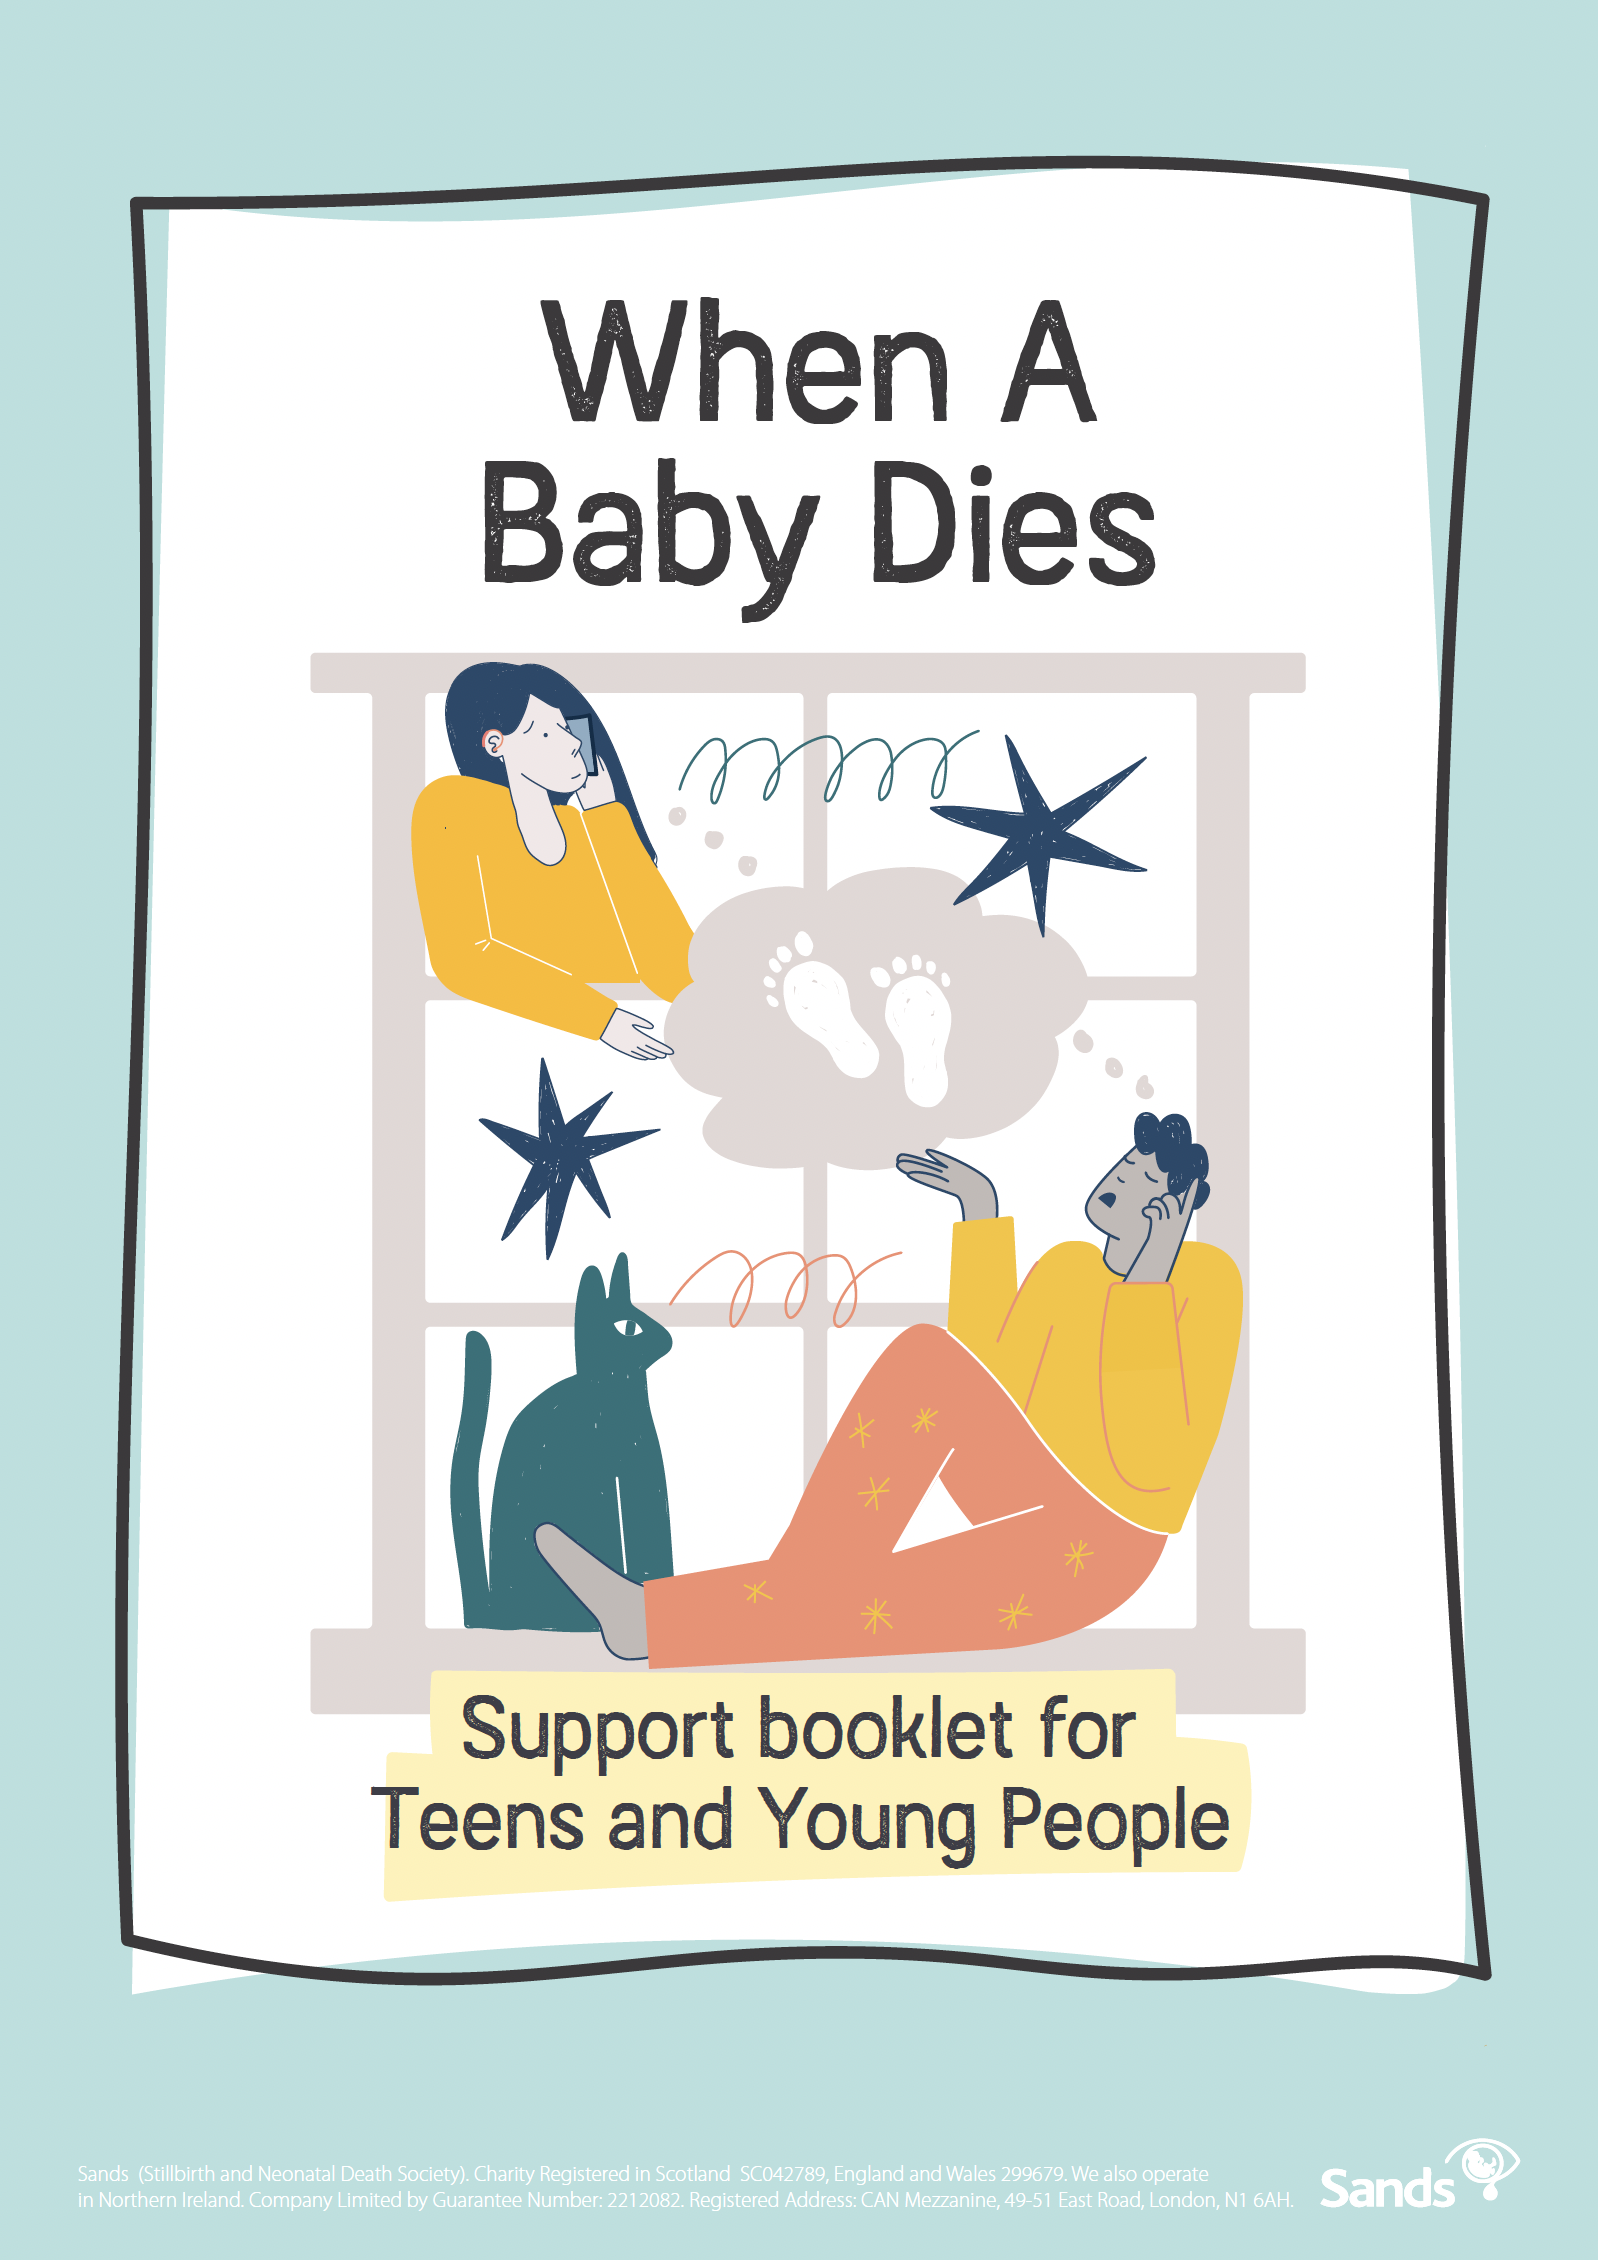 Support booklet for teens and young people